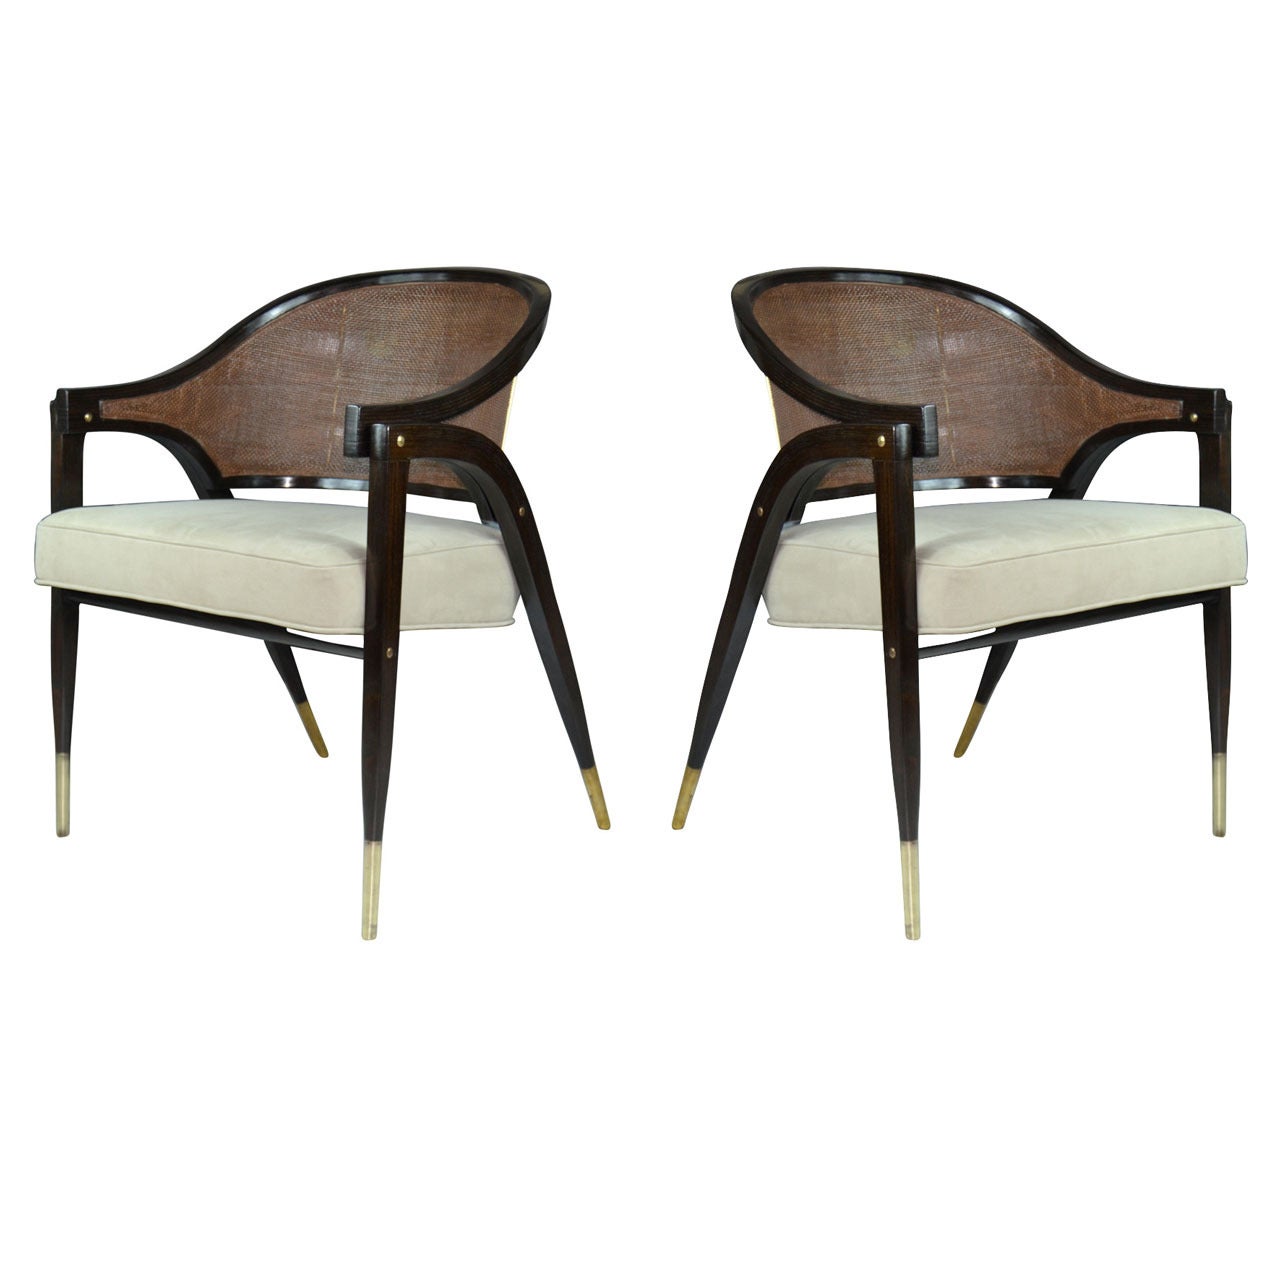 Pair of  "A-Frame" Armchairs by Edward Wormley for Dunbar